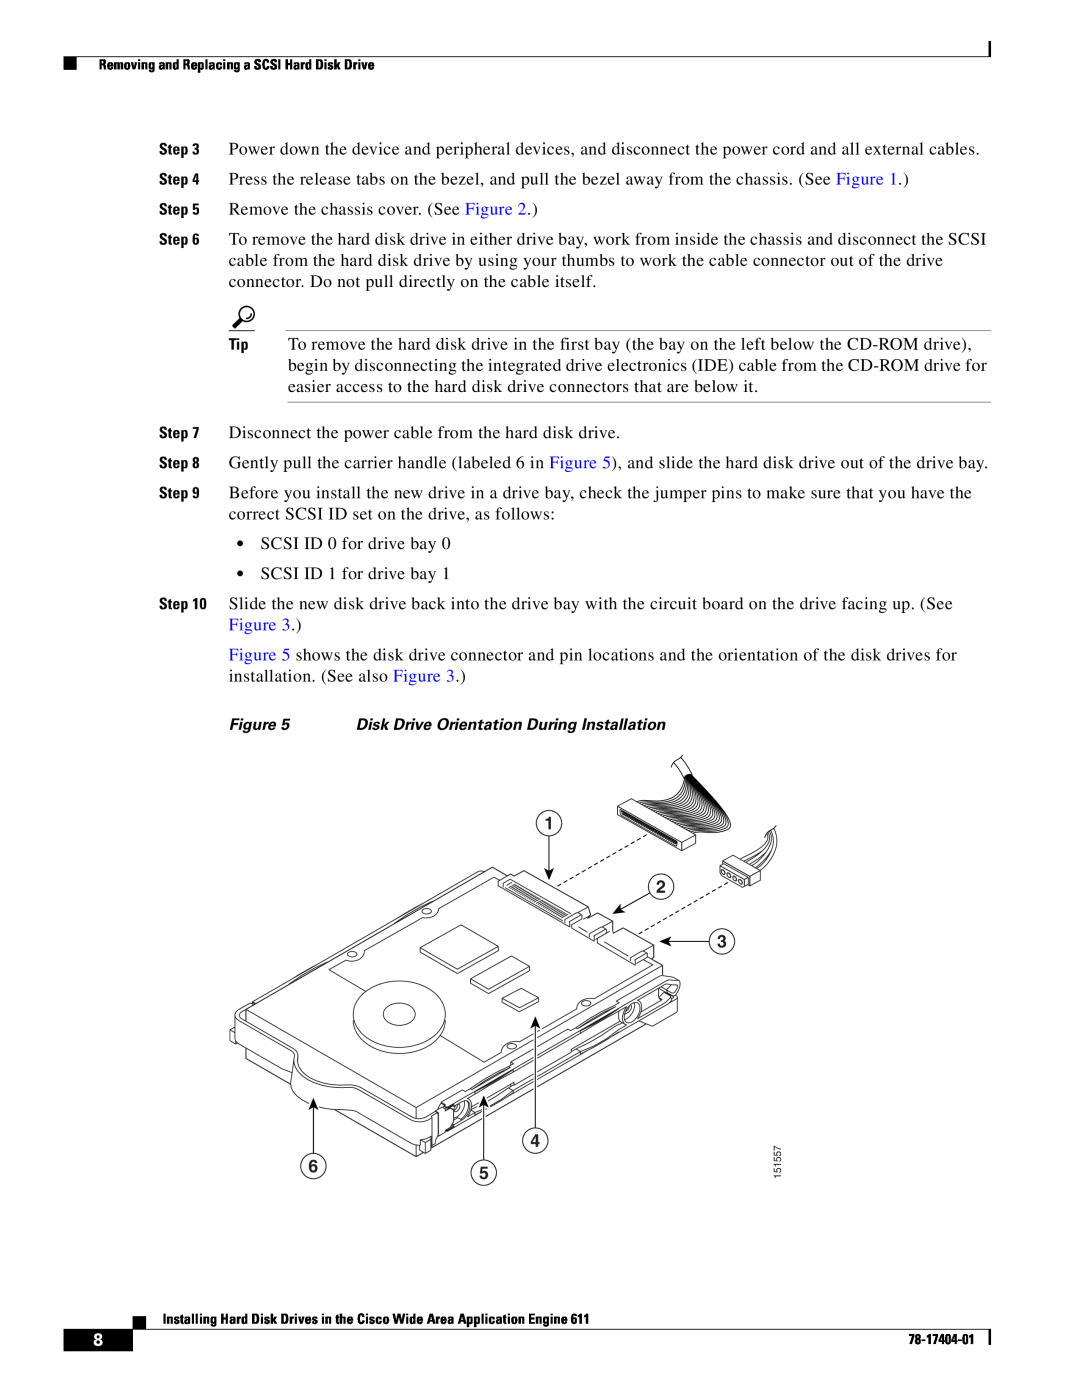 Cisco Systems Engine 611 manual Remove the chassis cover. See Figure 